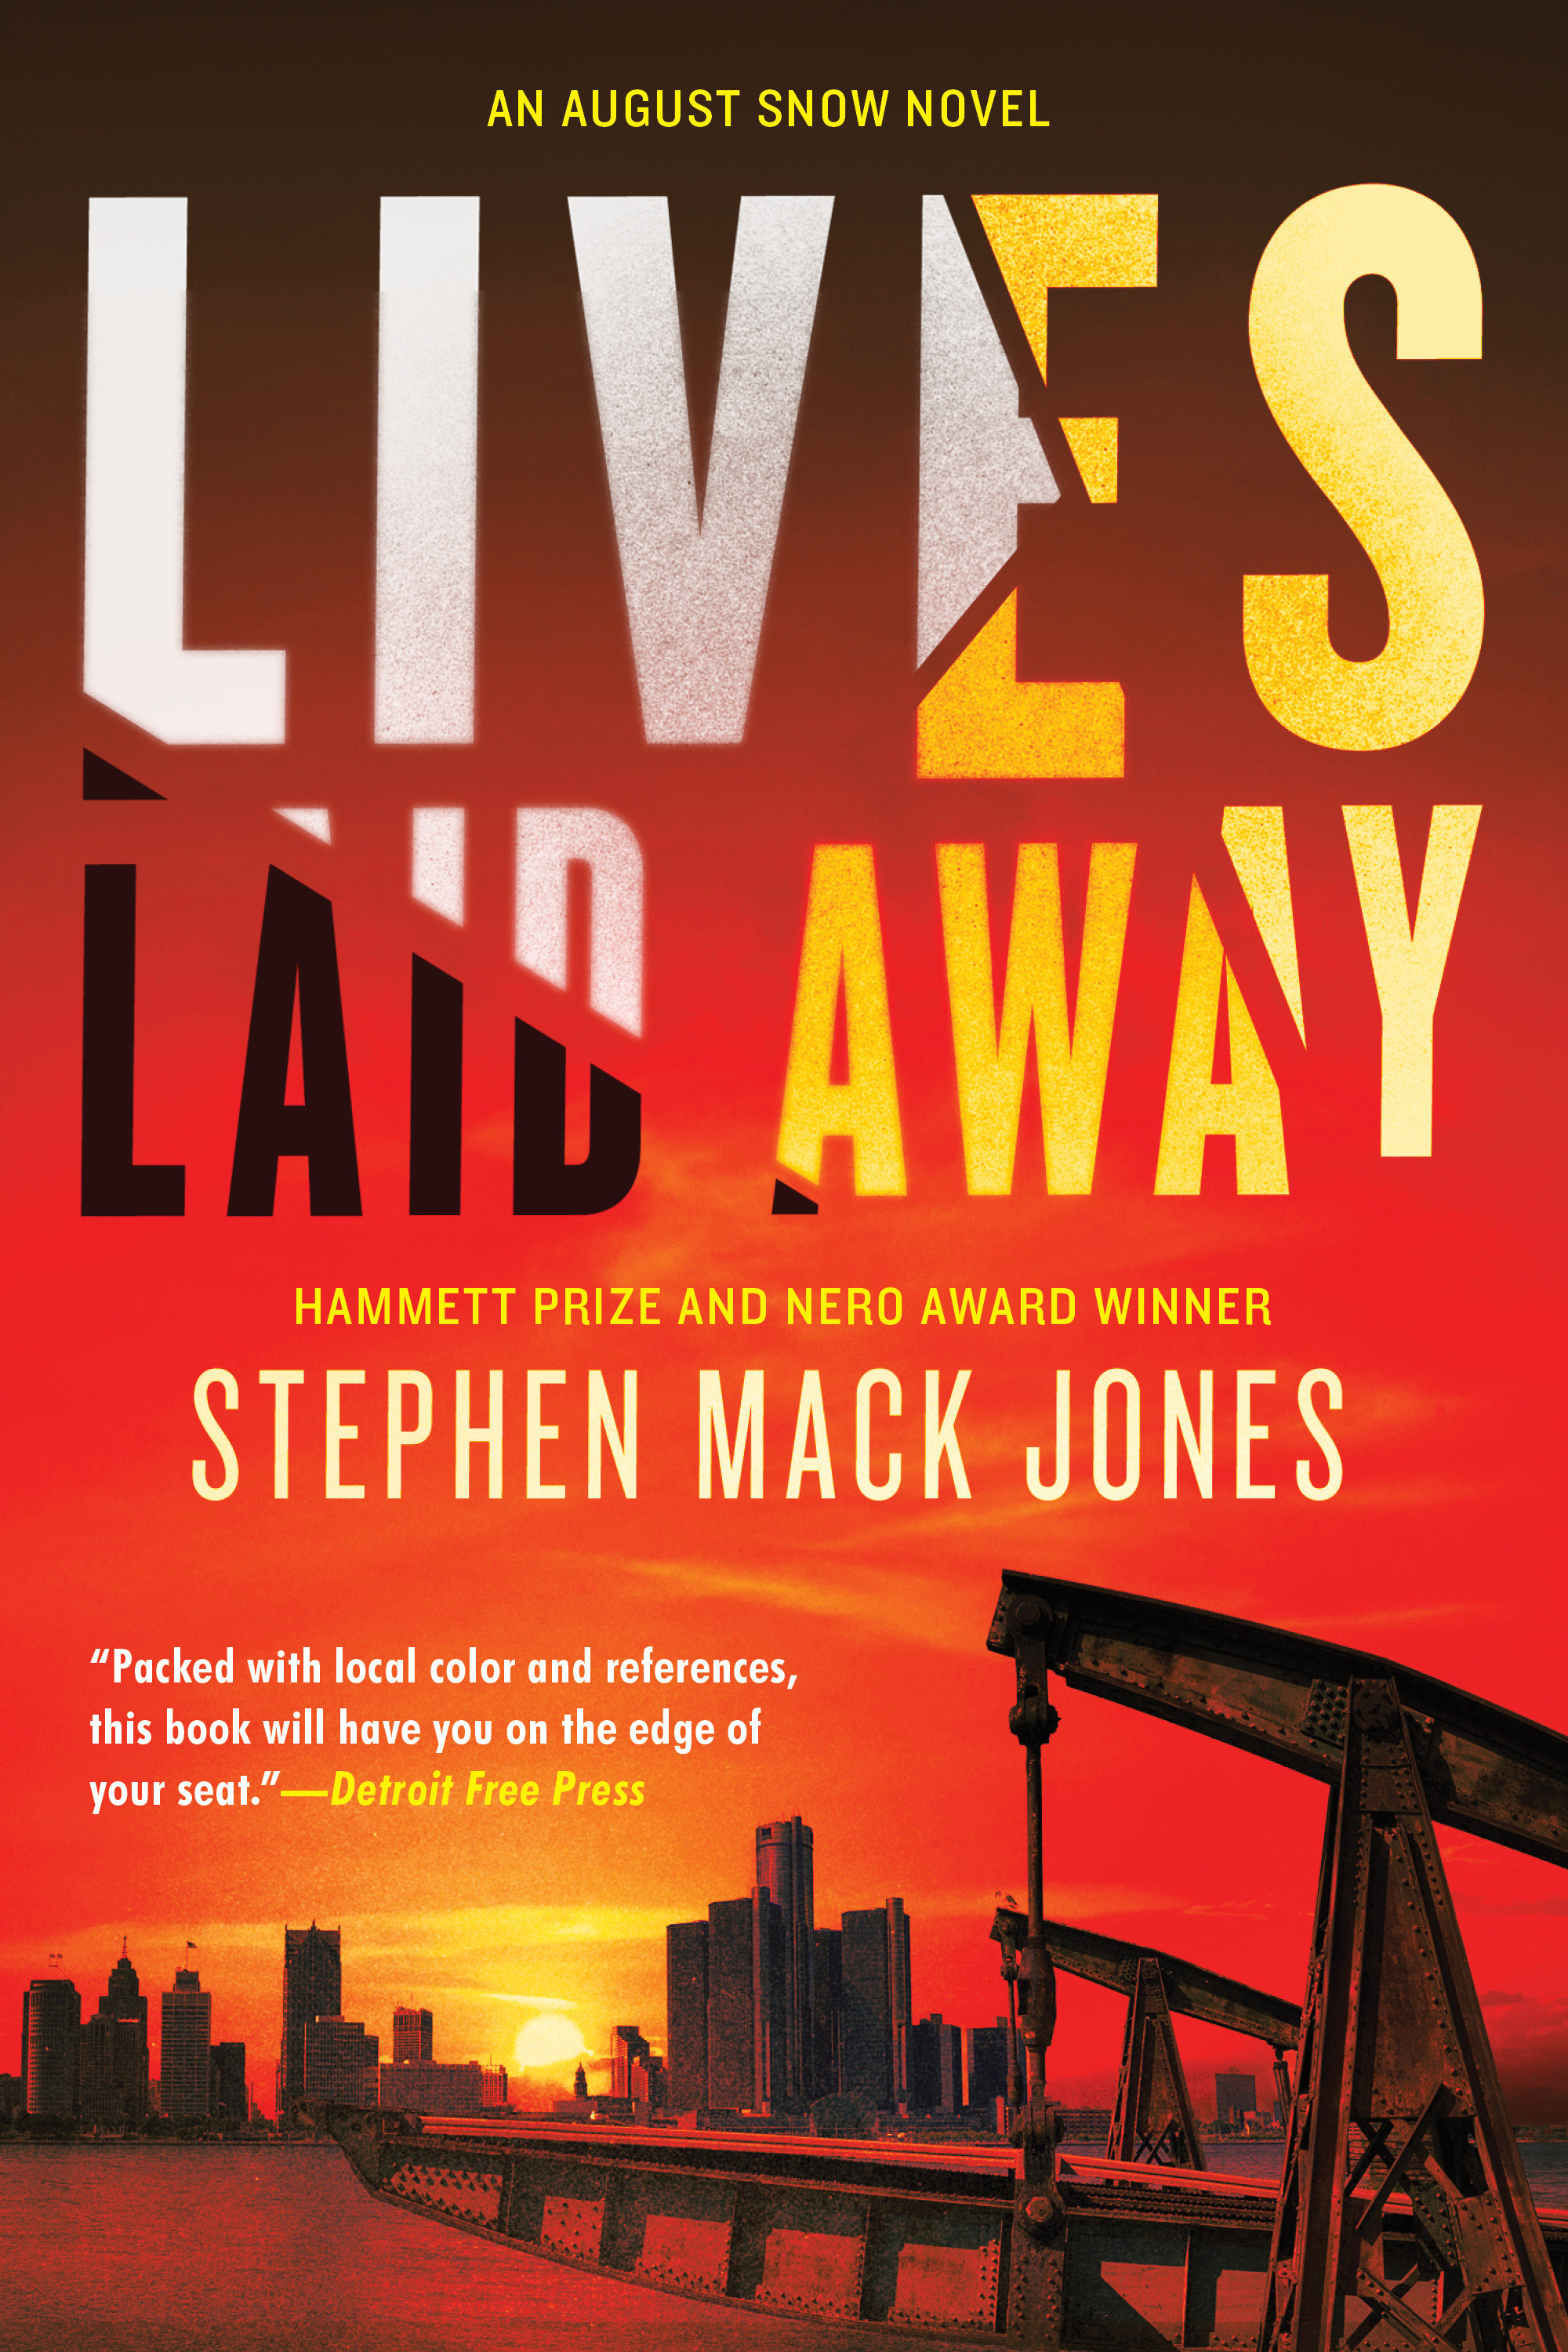 Lives laid away cover image